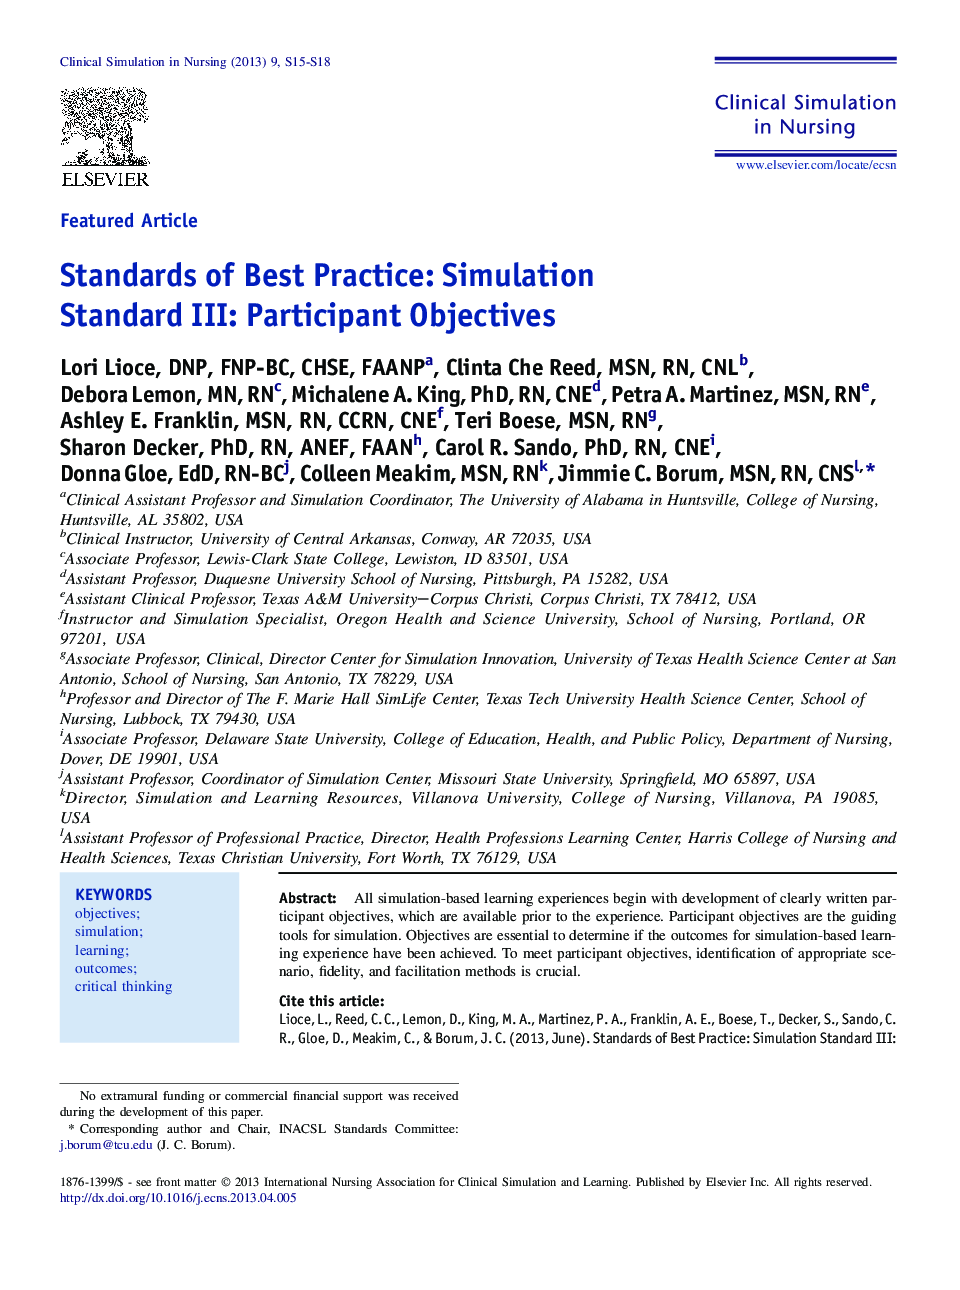 Standards of Best Practice: Simulation Standard III: Participant Objectives 